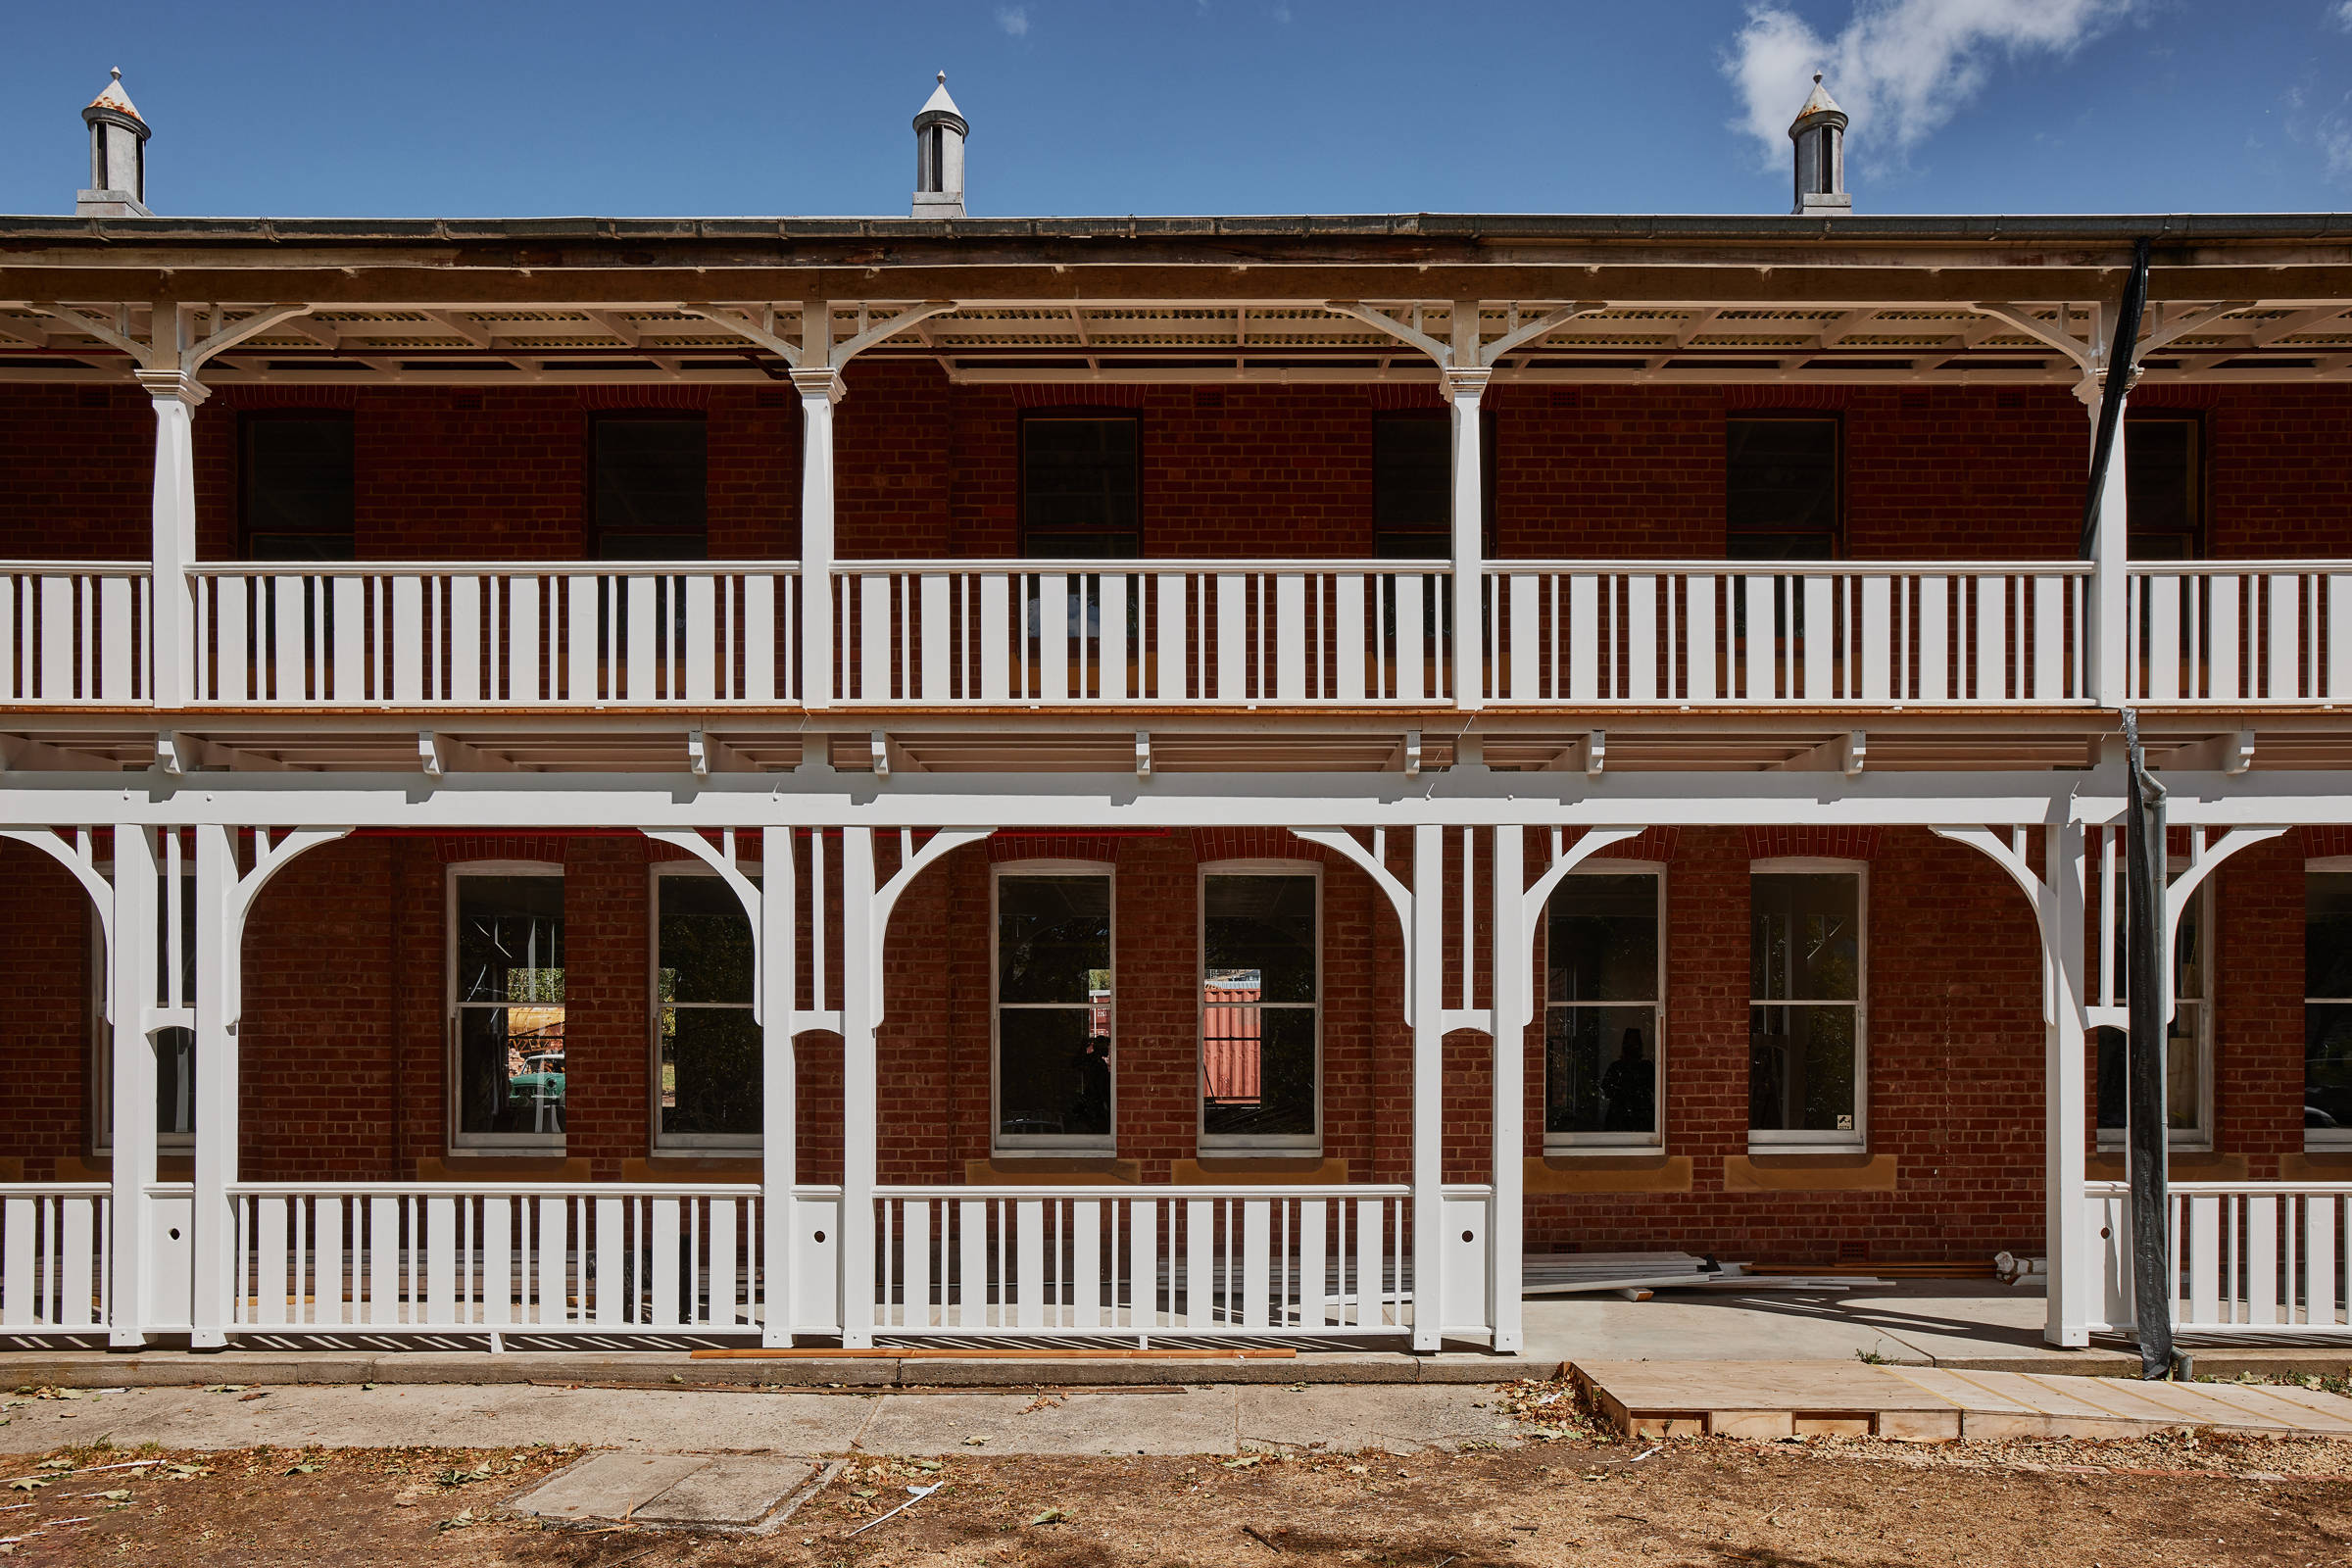 Front view of a double storey heritage building and a freshly painted white verandah with decorative supports and balustrades, and two heritage roof vents. Credit: Samuel Shelley.